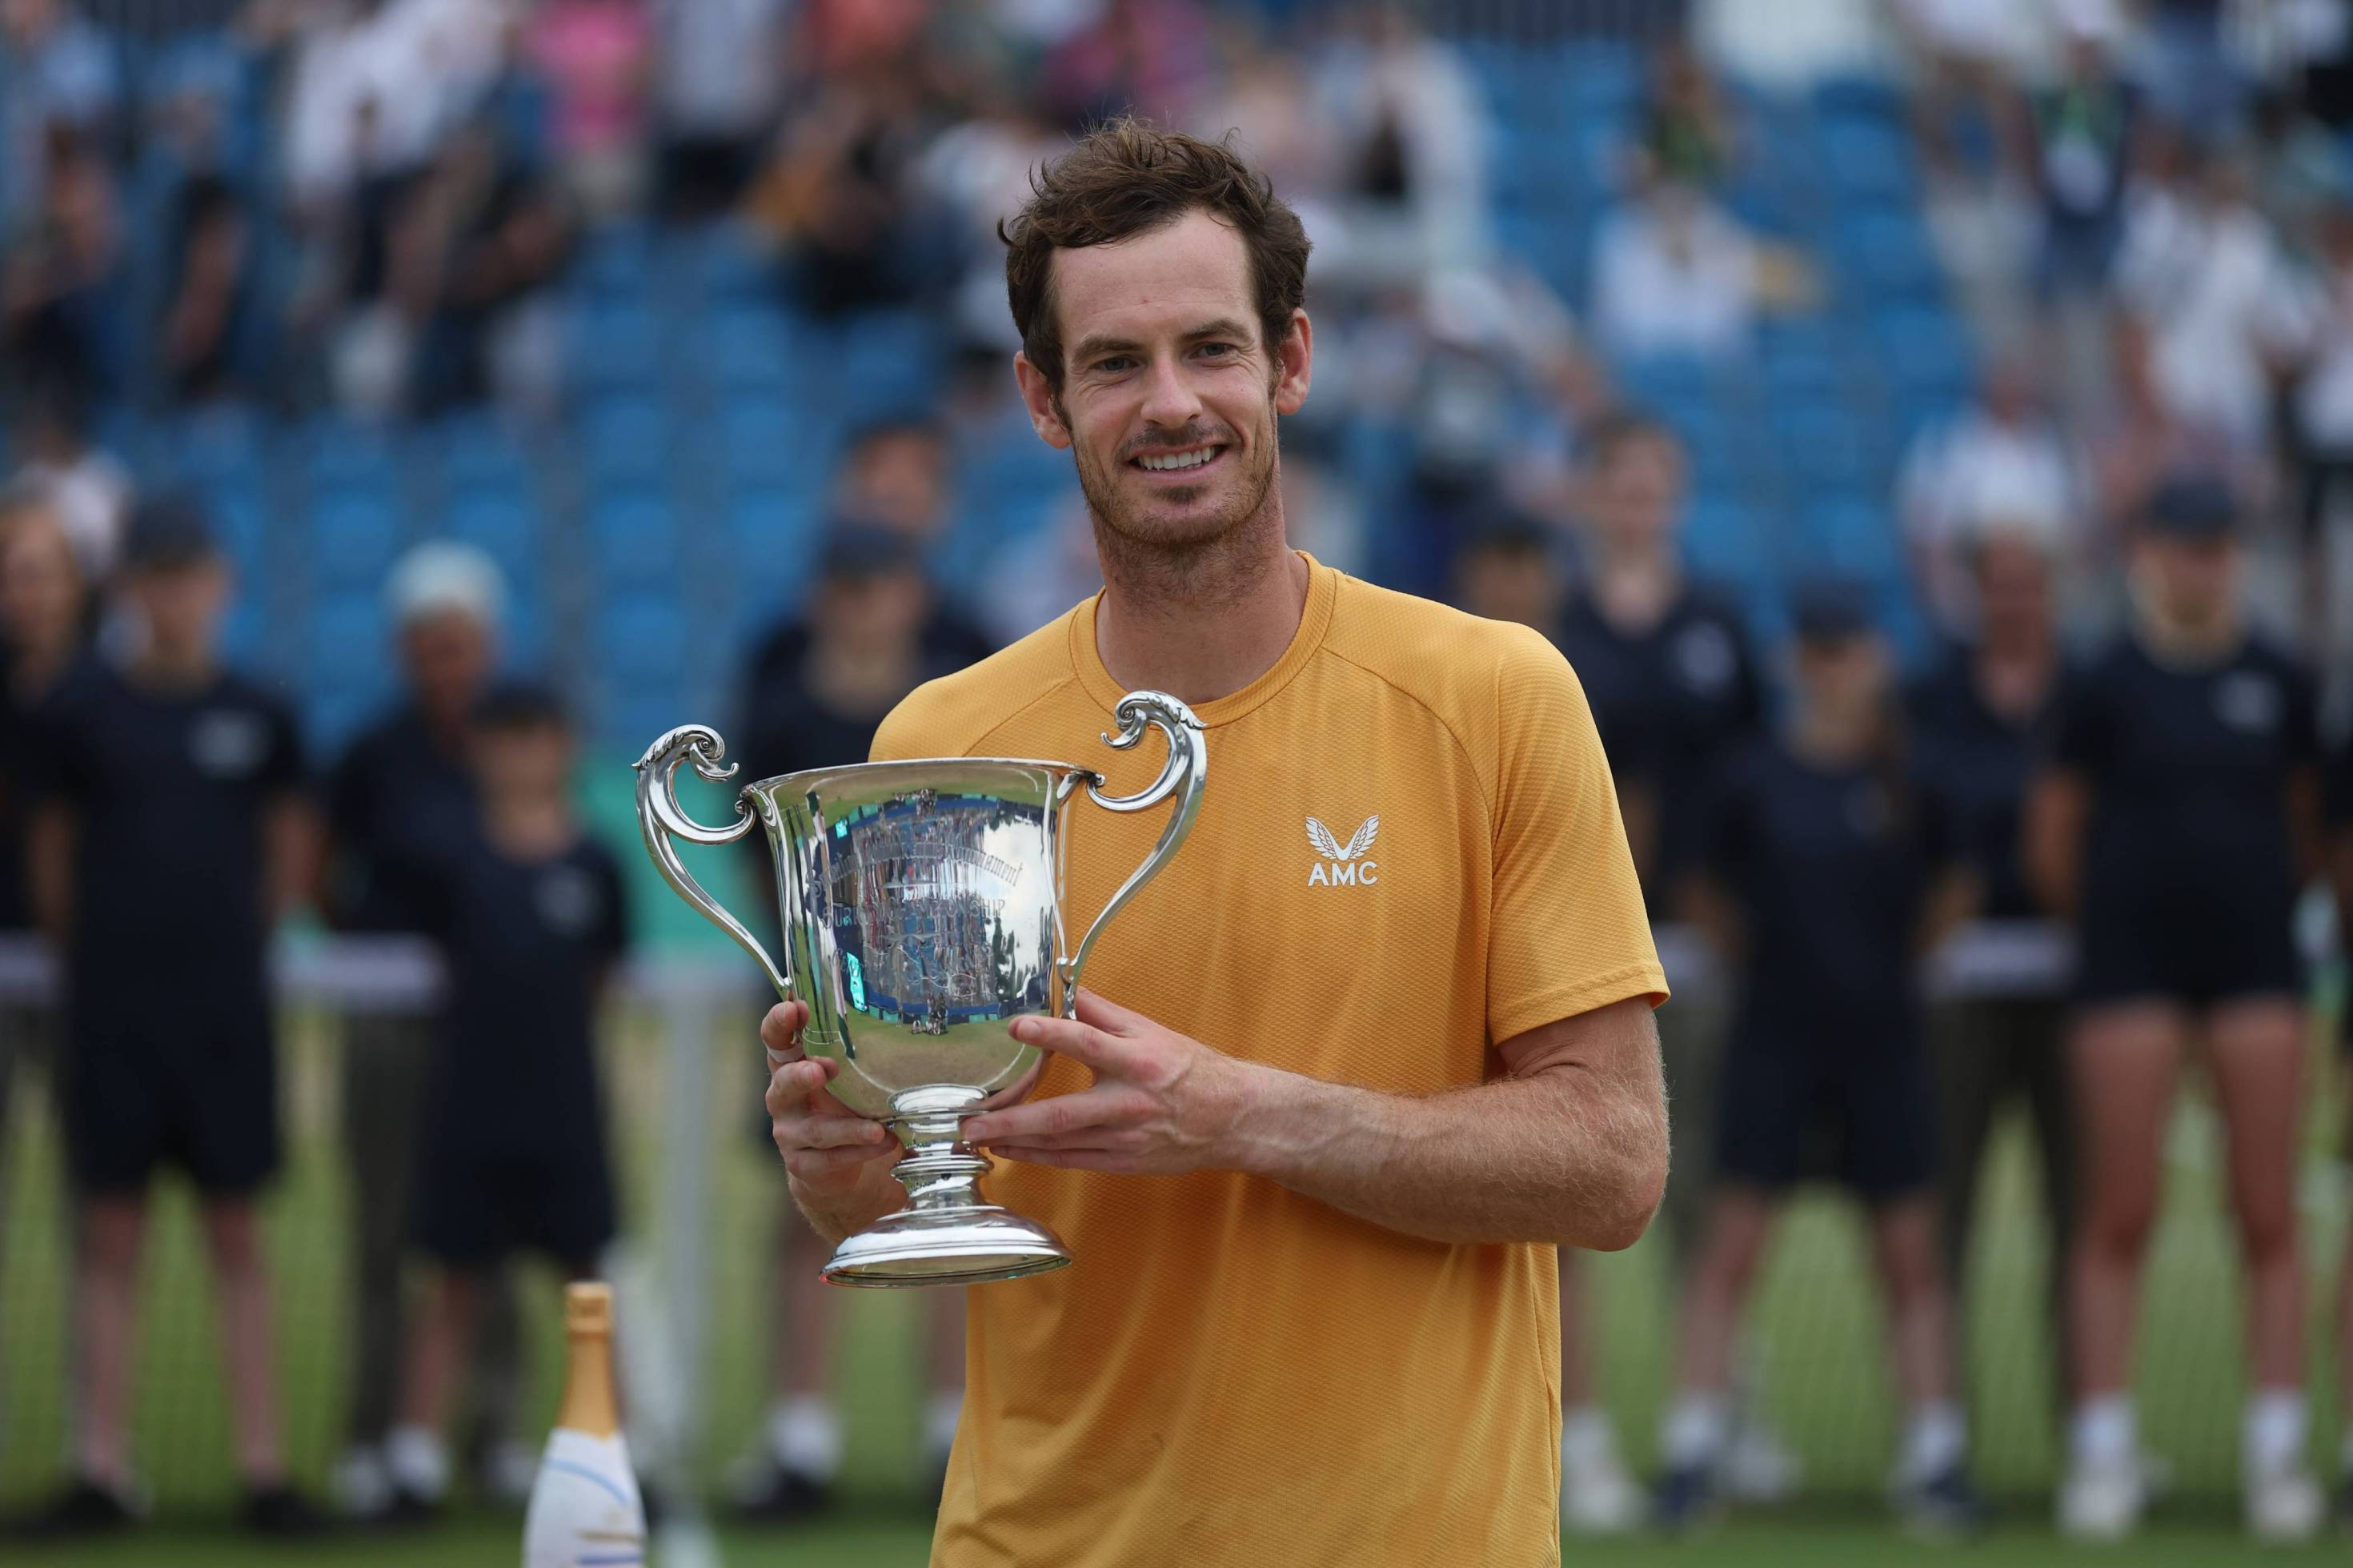 Tournament Schedule - Andy Murray